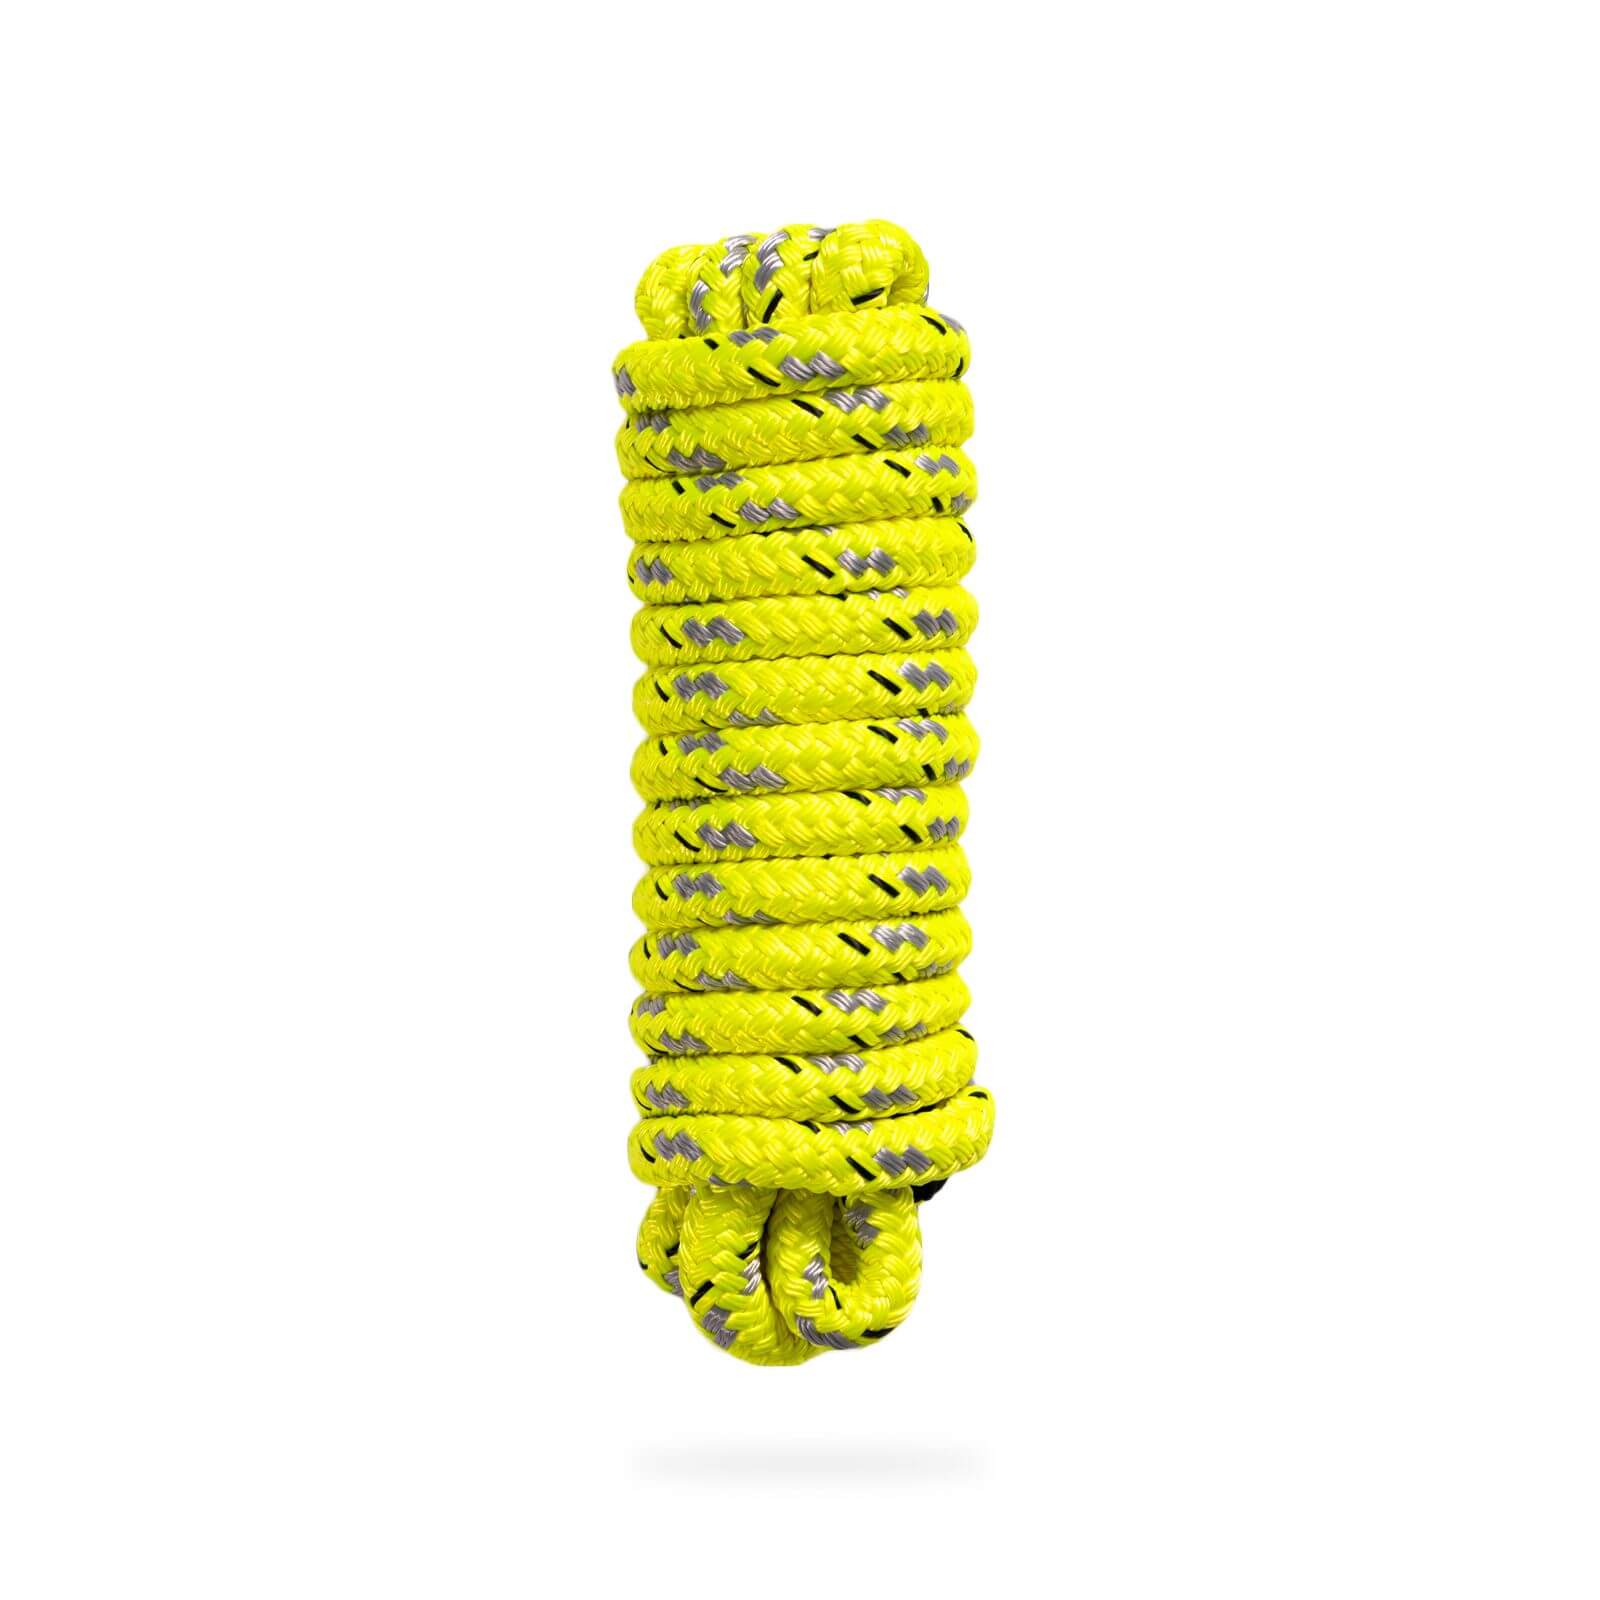 A high strength double braided yellow Mission Dock Lines on a white background.